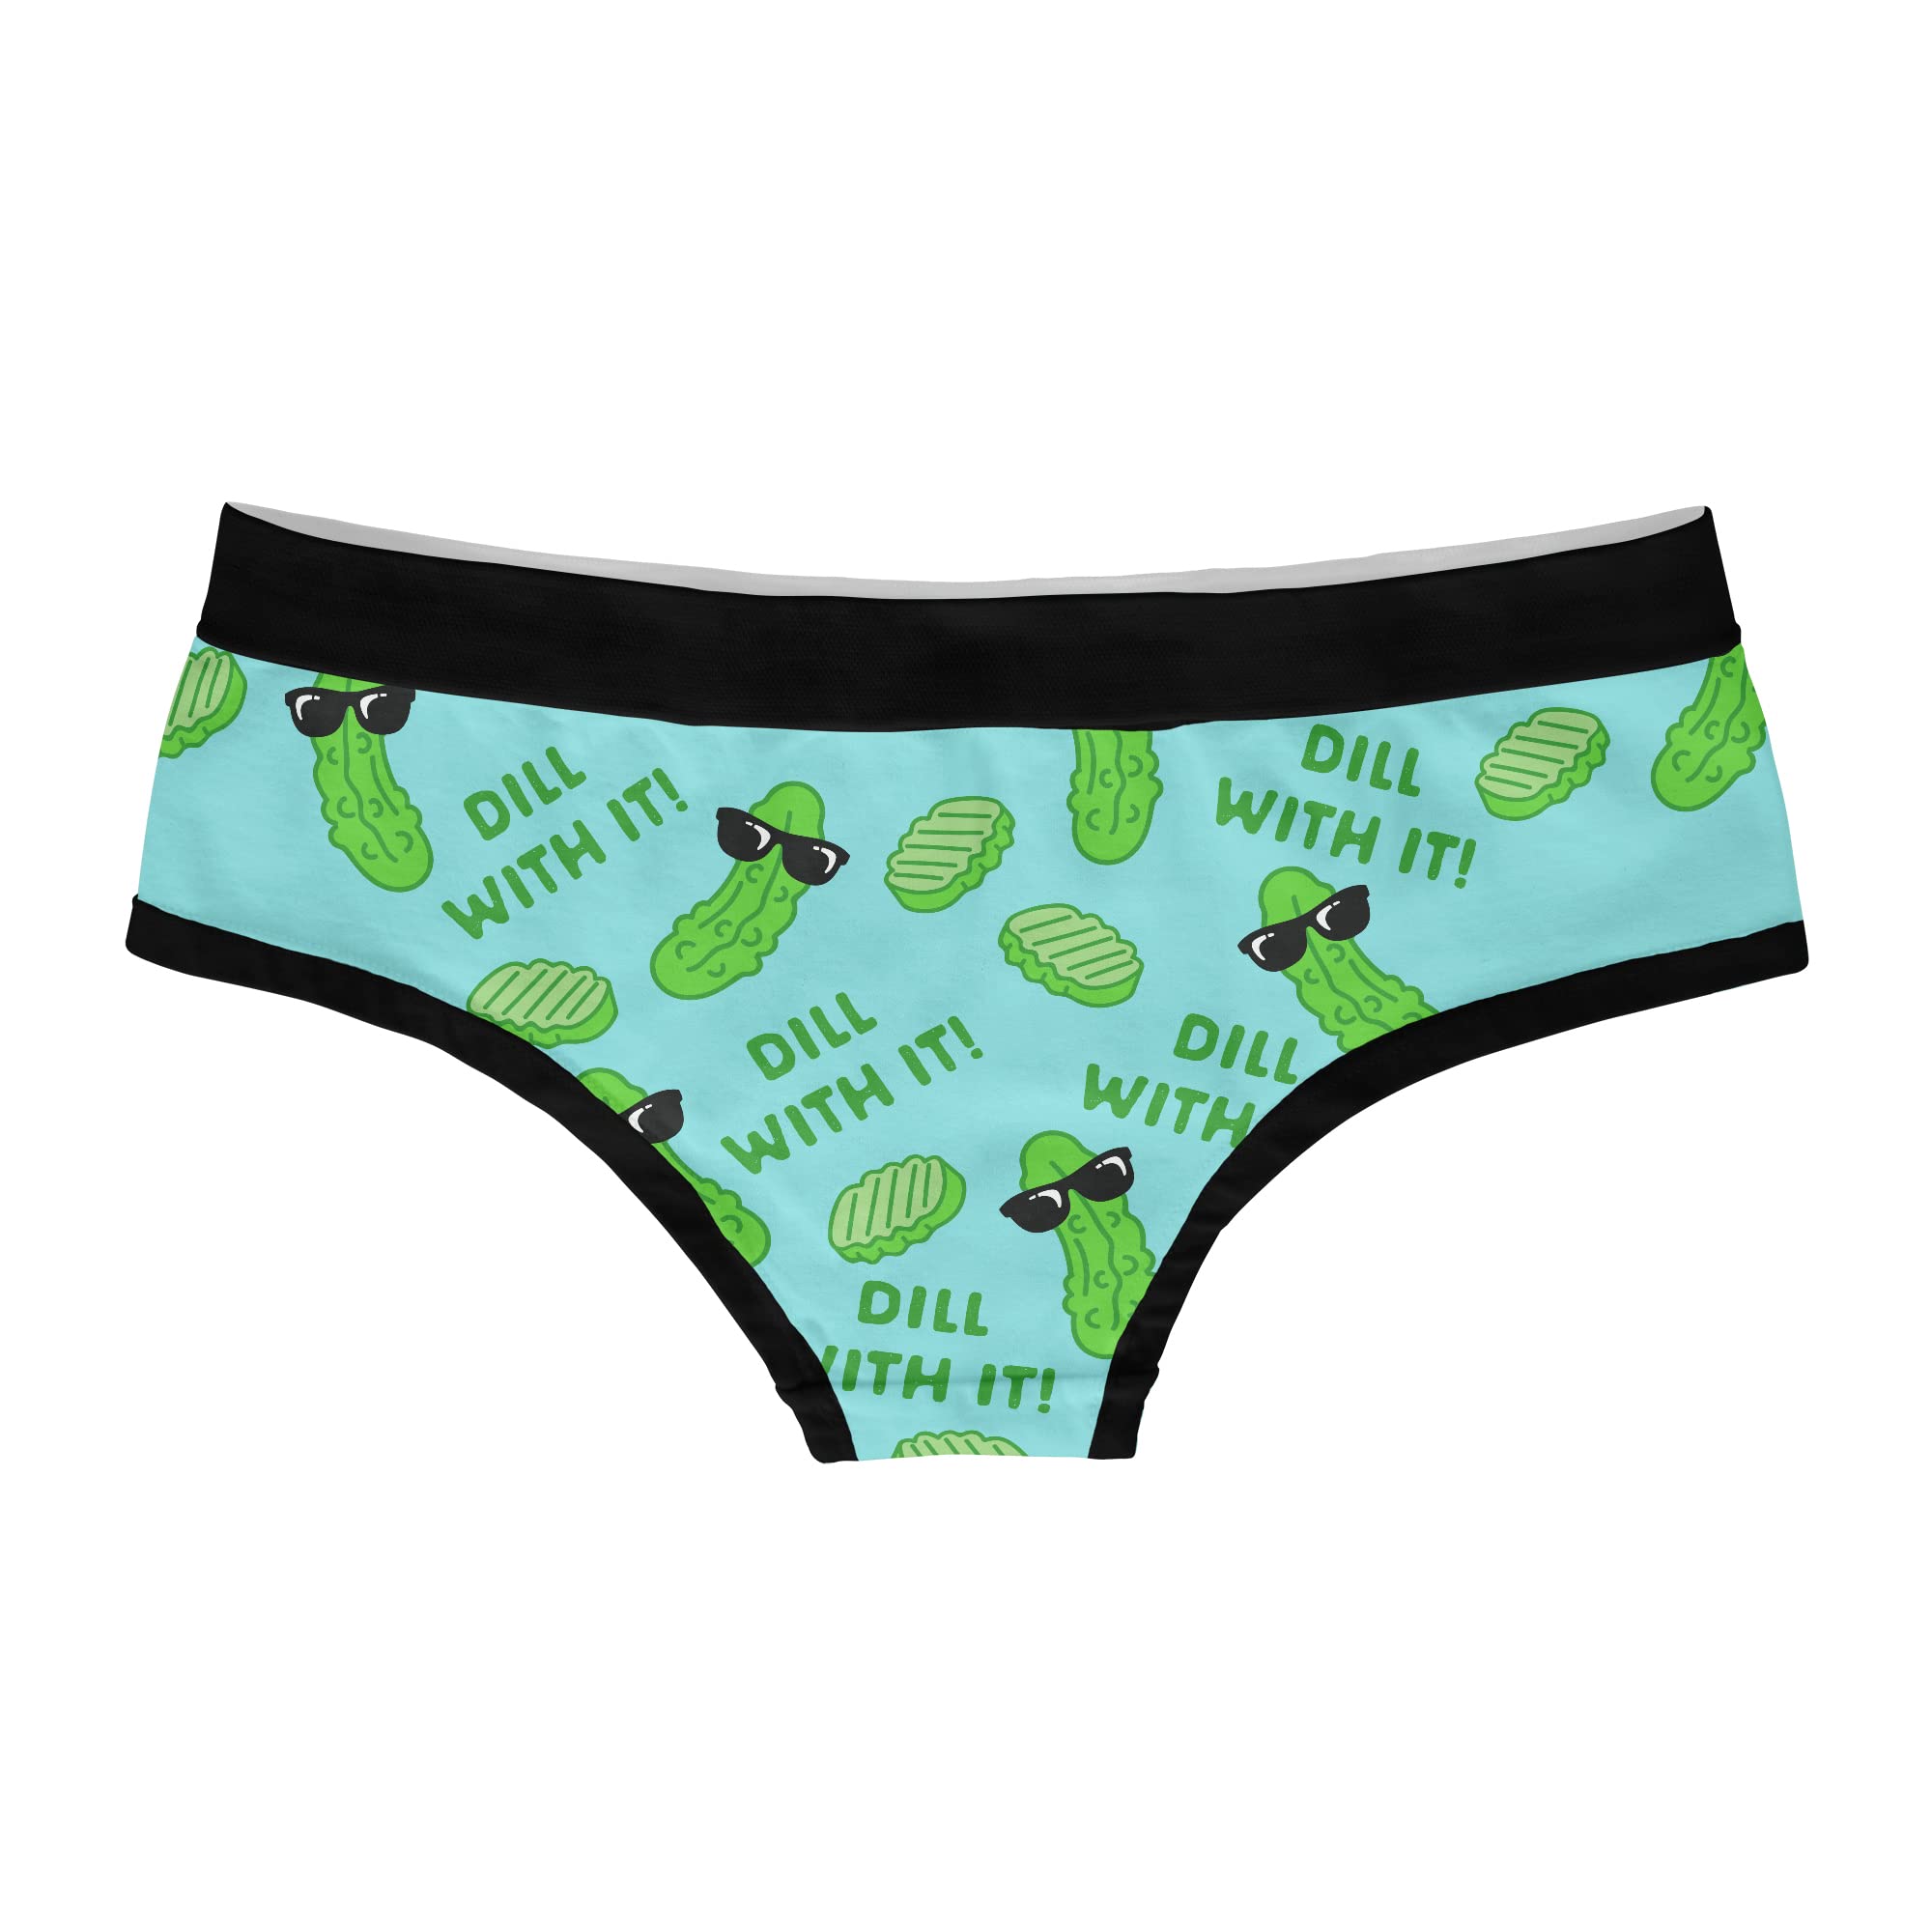 Crazy Dog T-Shirts Womens Dill With It Panties Funny Pickle Joke Graphic Humor Bikini Brief Underwear